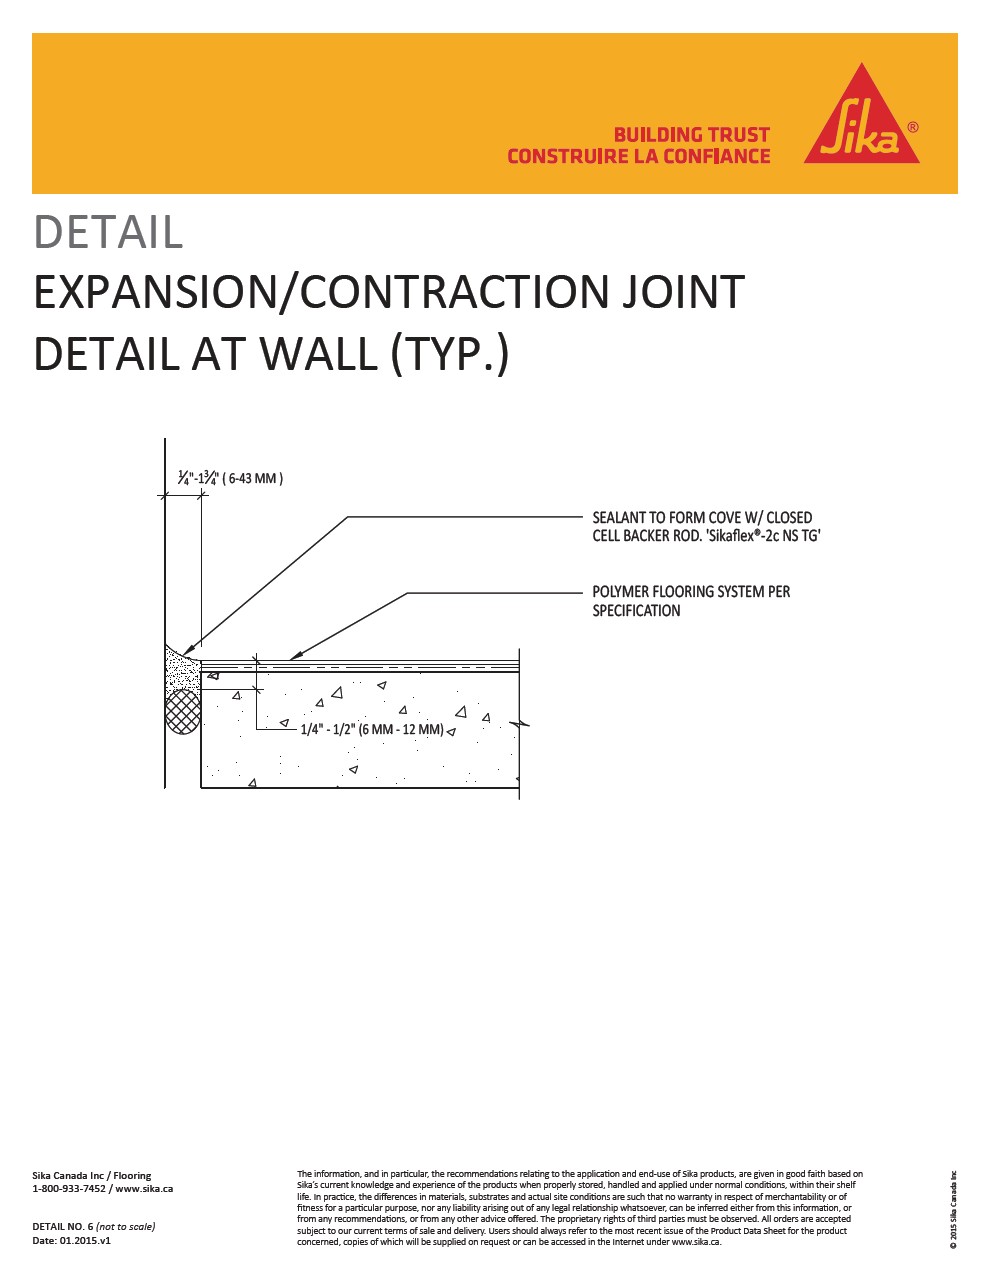 6-Expansion-Contraction Joint Detail at Wall 